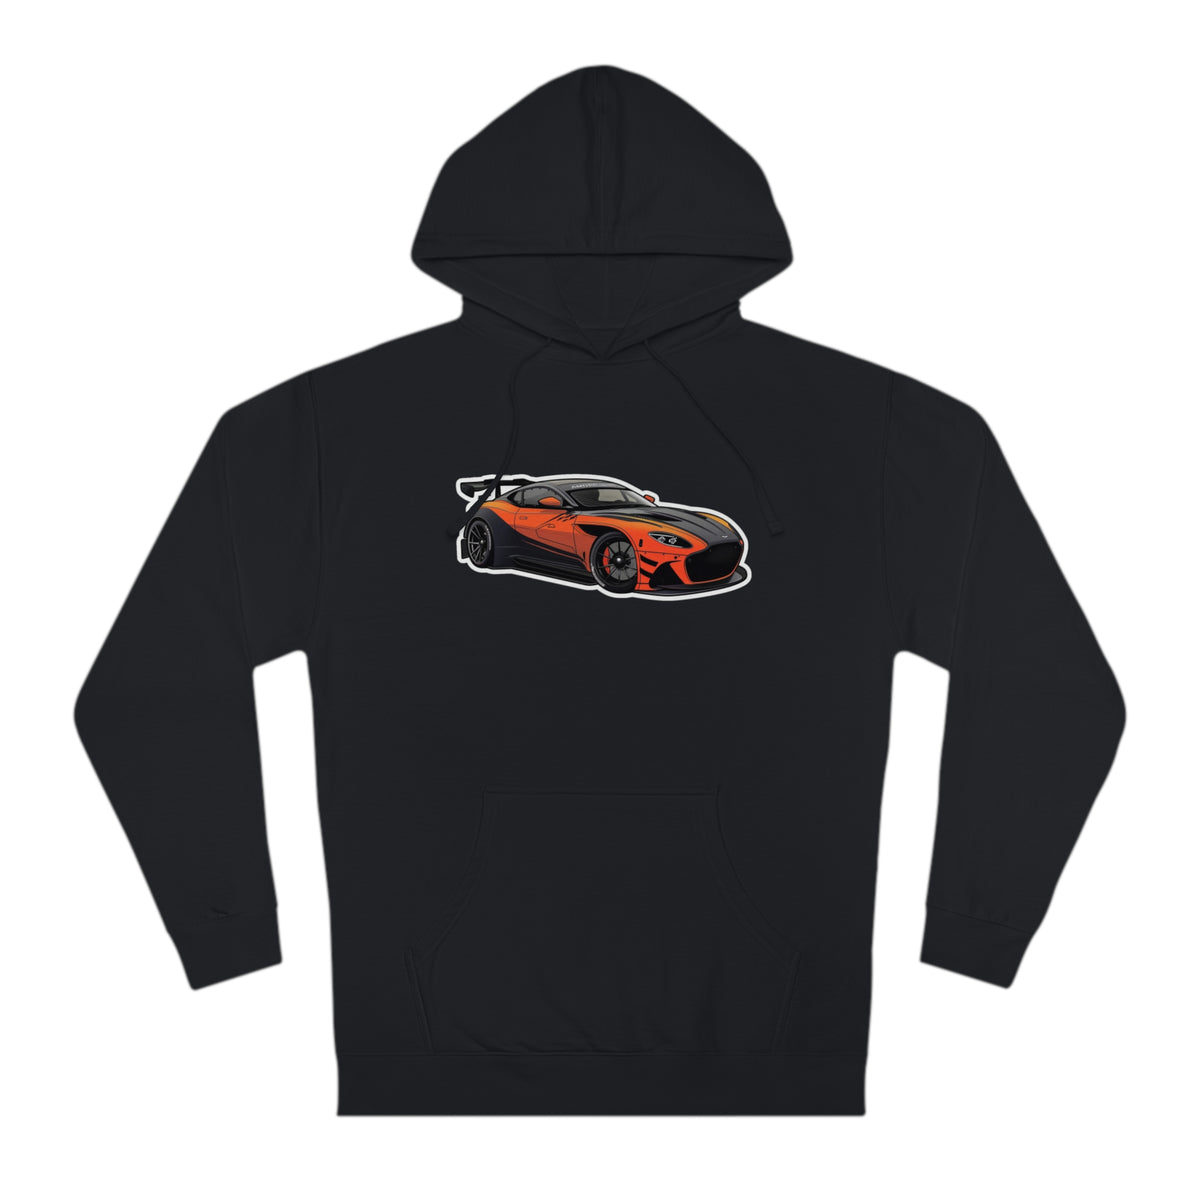 Sunset Sprint Men's Hoodie with Performance Car Graphic Hooded Sweatshirt